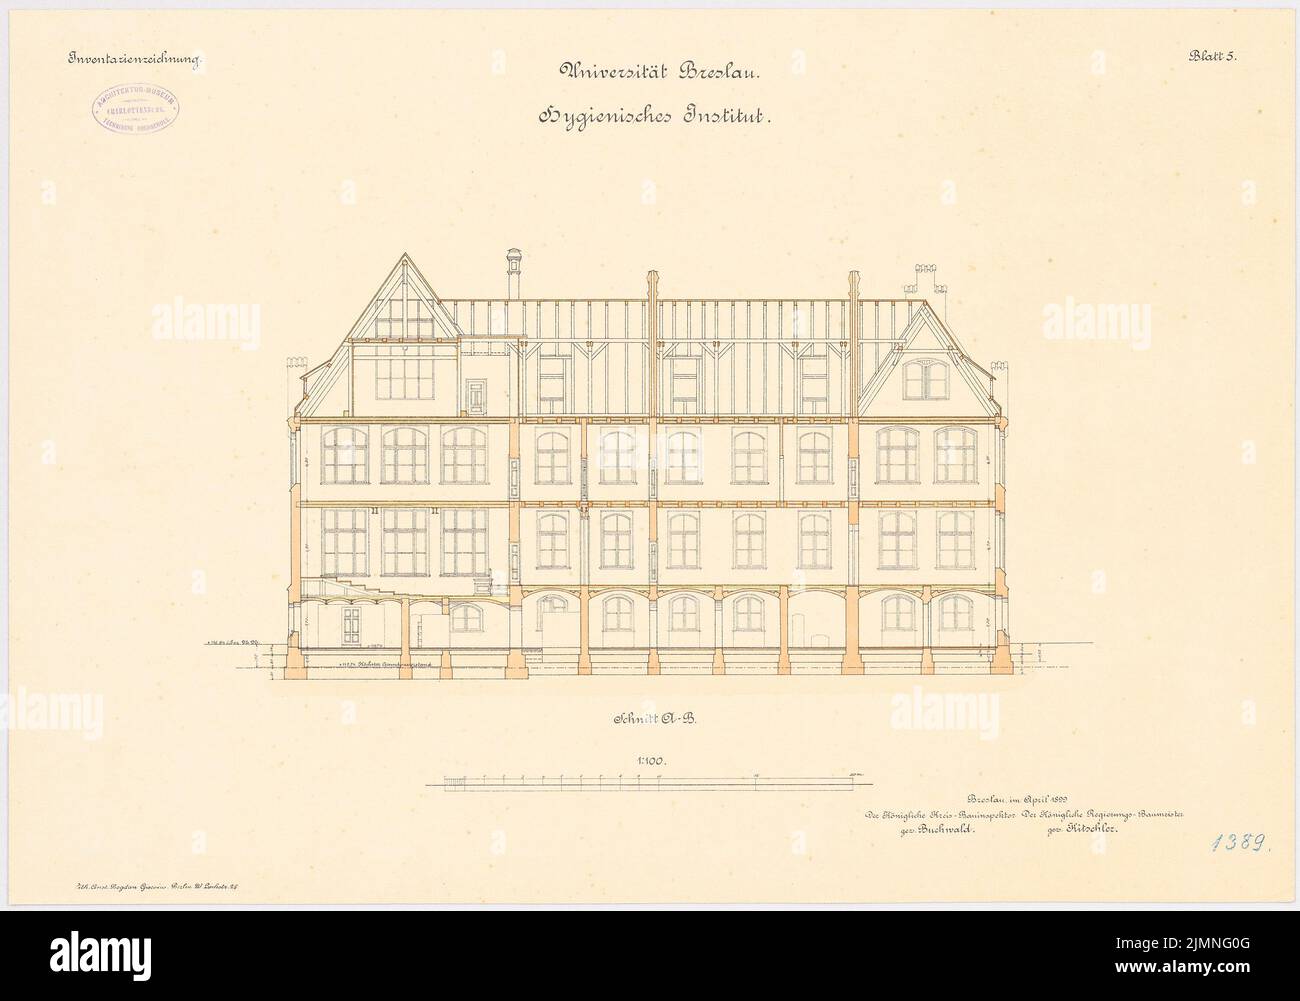 Buchwald Arthur, University, Wroclaw. Medical institutes on Maxstrasse. Hygienic Institute (1897-1899): Longitudinal section 1: 100. Lithograph, 46.9 x 66.9 cm (including scan edges) Stock Photo